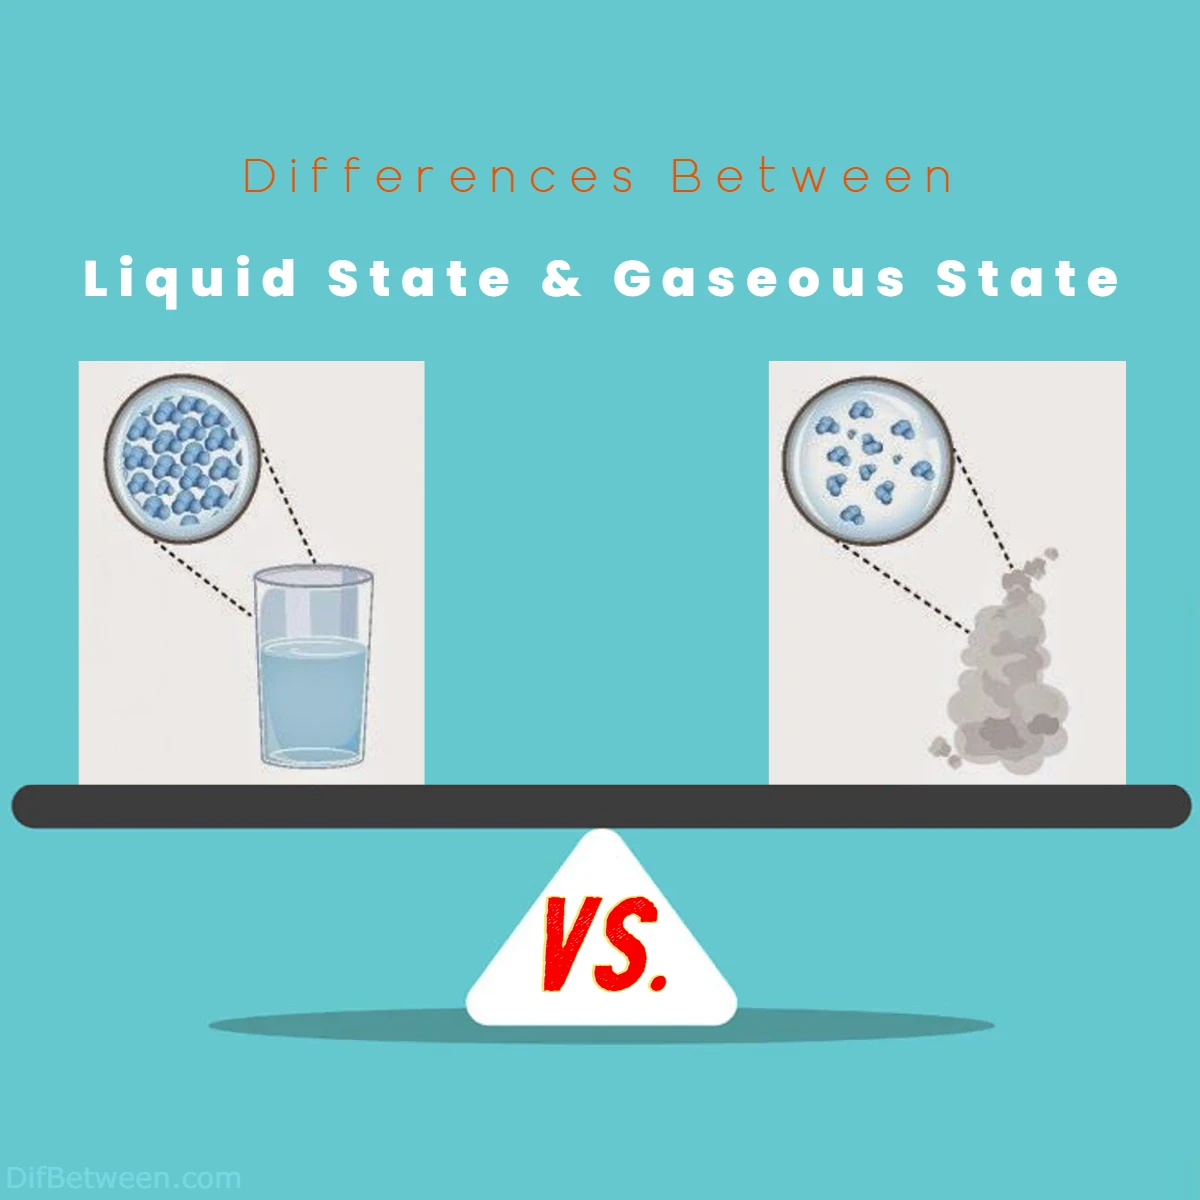 Differences Between Liquid State vs Gaseous State